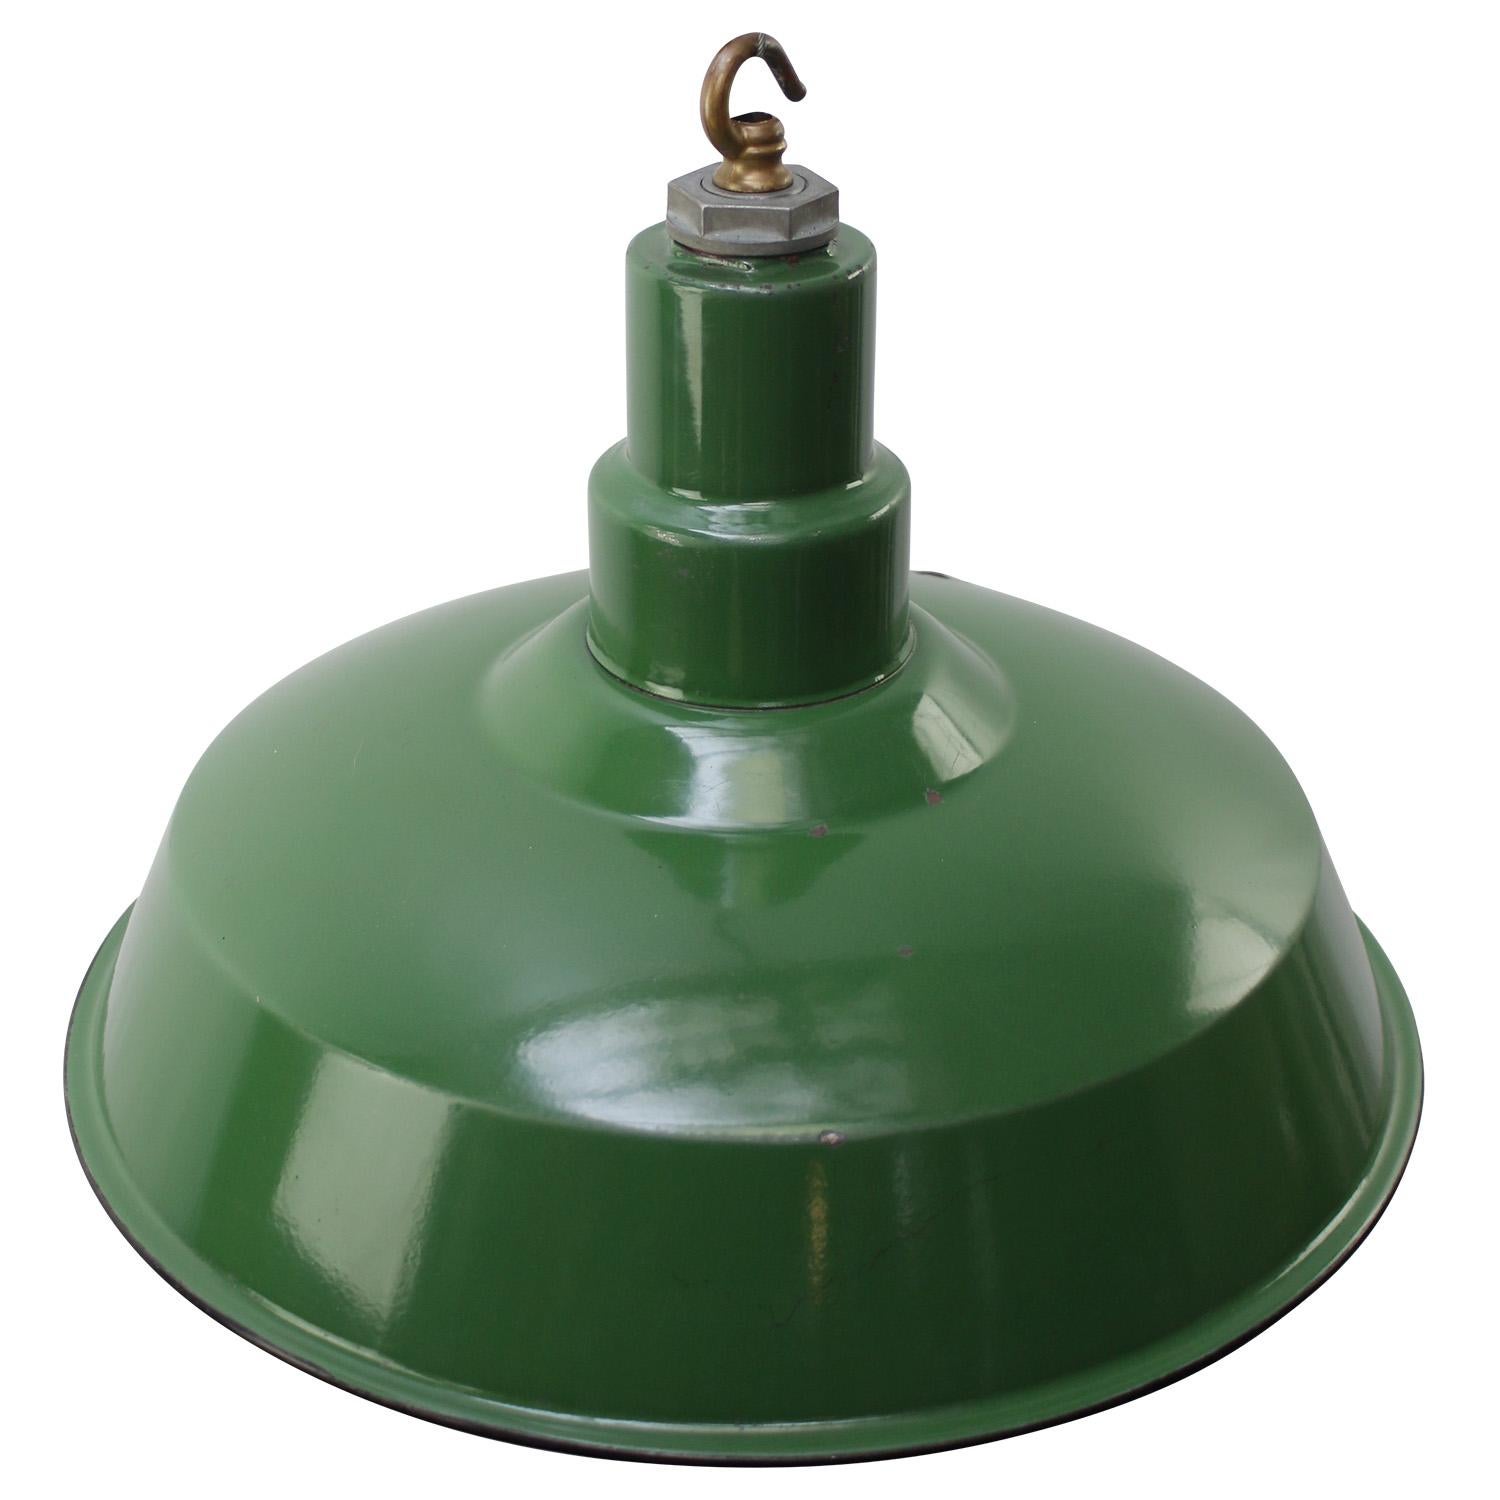 American vintage industrial hanging pendant.
Green enamel with white interior. Brass top.

Weight: 2.00 kg / 4.4 lb

Priced per individual item. All lamps have been made suitable by international standards for incandescent light bulbs,